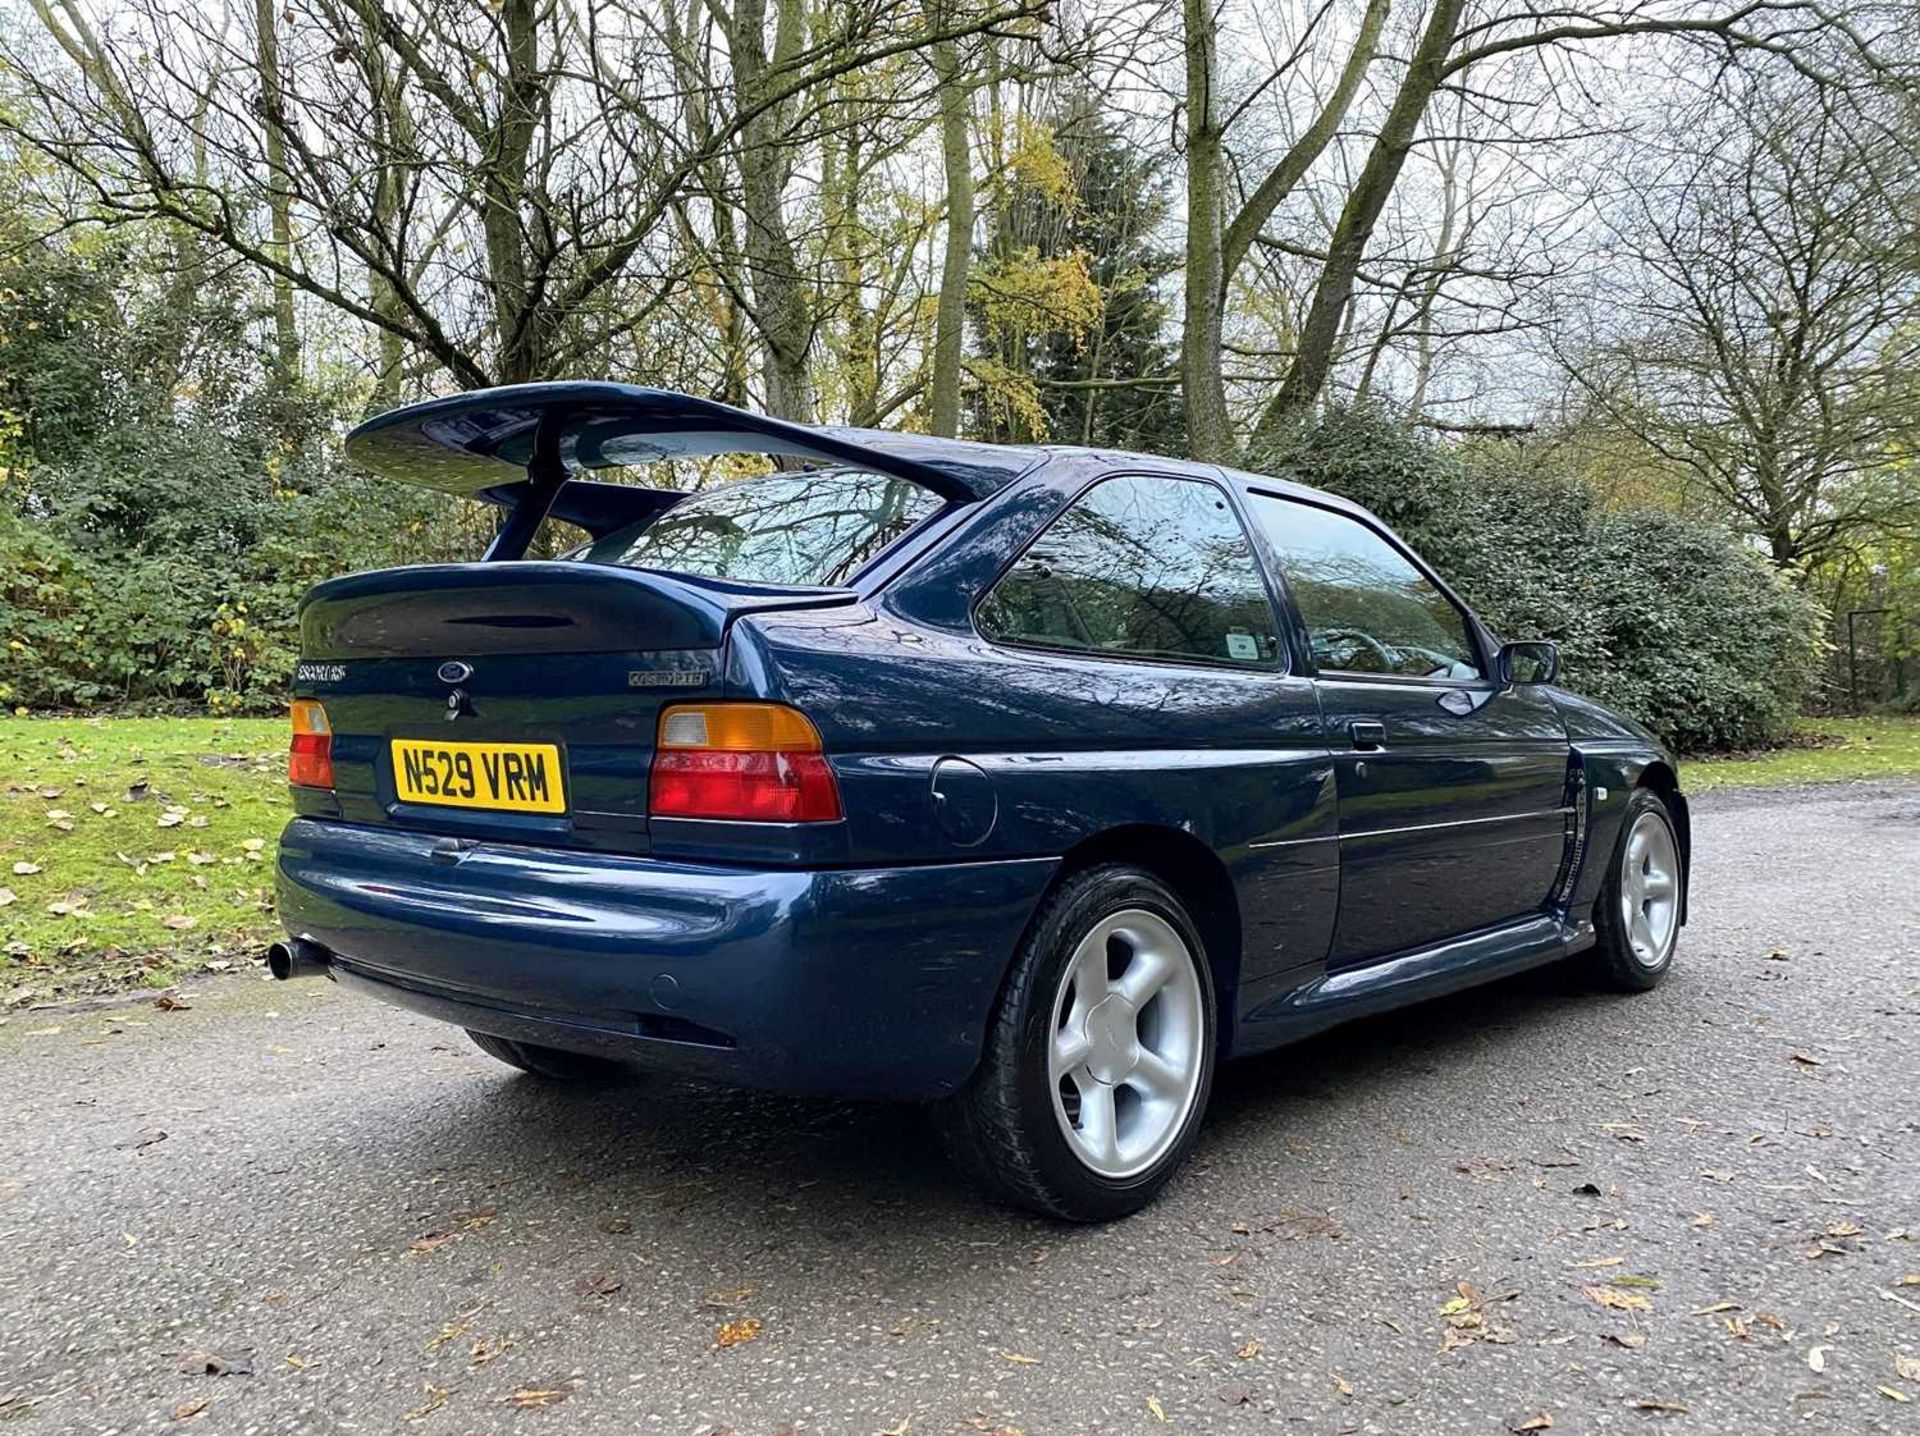 1995 Ford Escort RS Cosworth LUX Only 56,000 miles, finished in rare Petrol Blue - Image 22 of 98